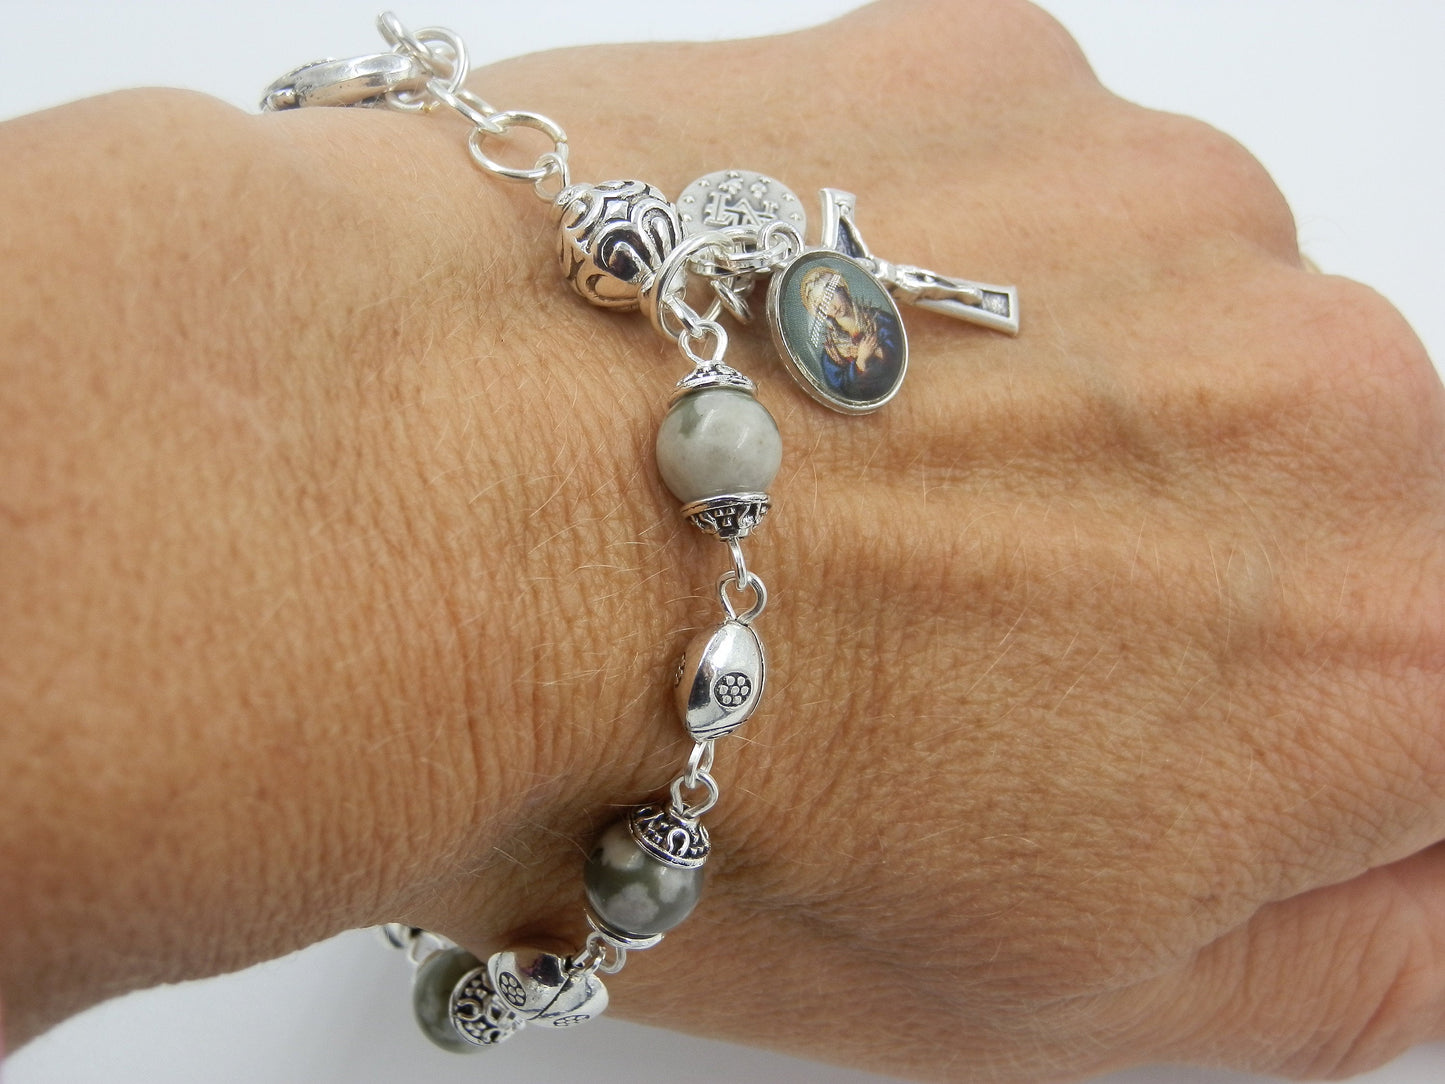 Our Lady of Sorrows Ladybug single decade rosary bracelet, Miraculous medal Rosary Bracelet, Crucifix, Jewellery gift, Religious medals.